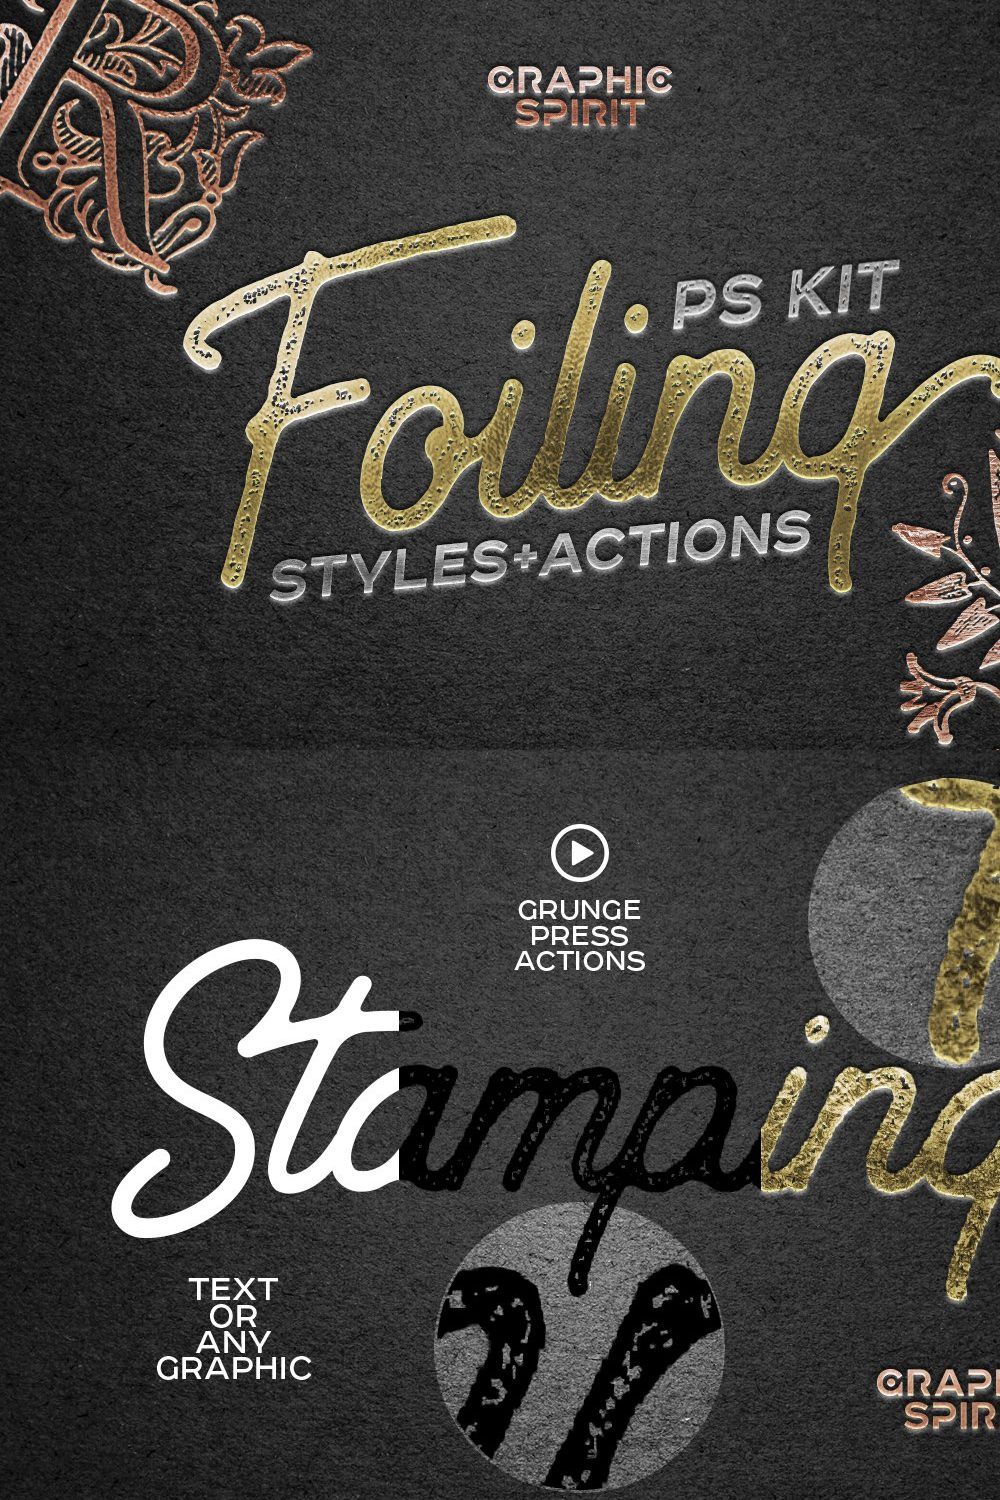 FOIL STAMP Photoshop Styles+Actions pinterest preview image.